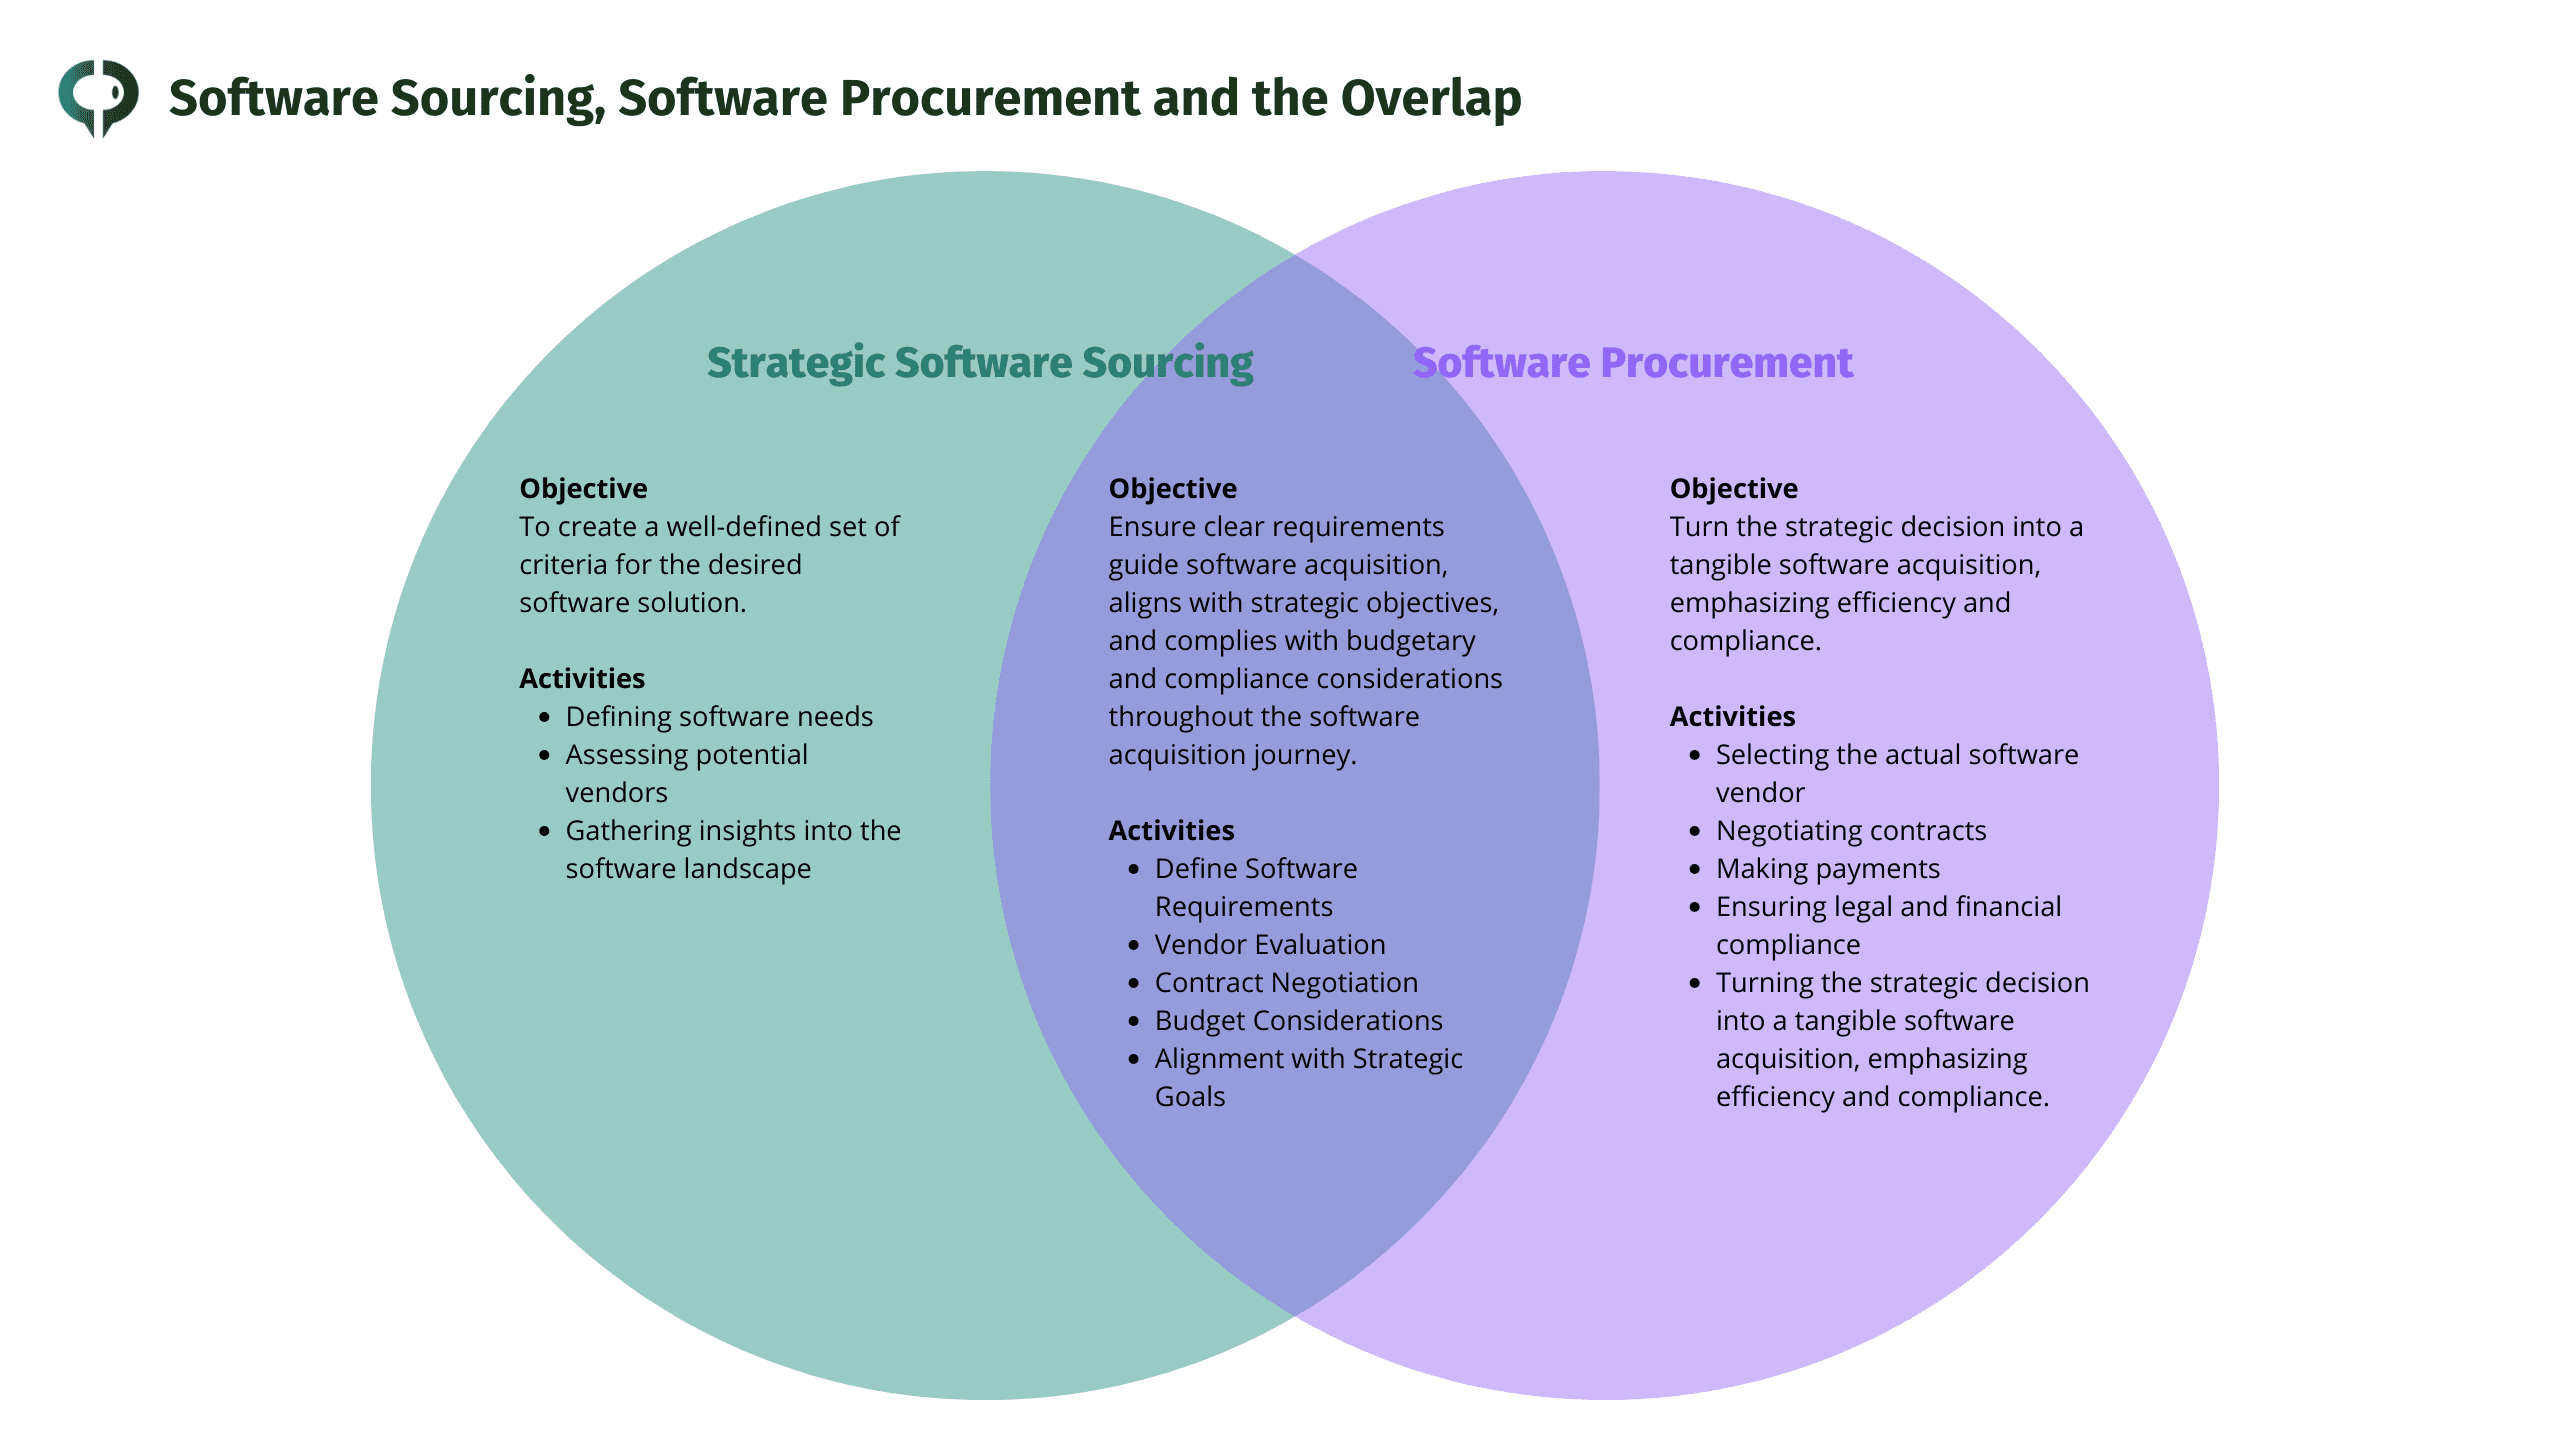 Software Sourcing, Software Procurement and the Overlap. Venn Diagram pf Software Sourcing and Software Procurement activites including where they converge.